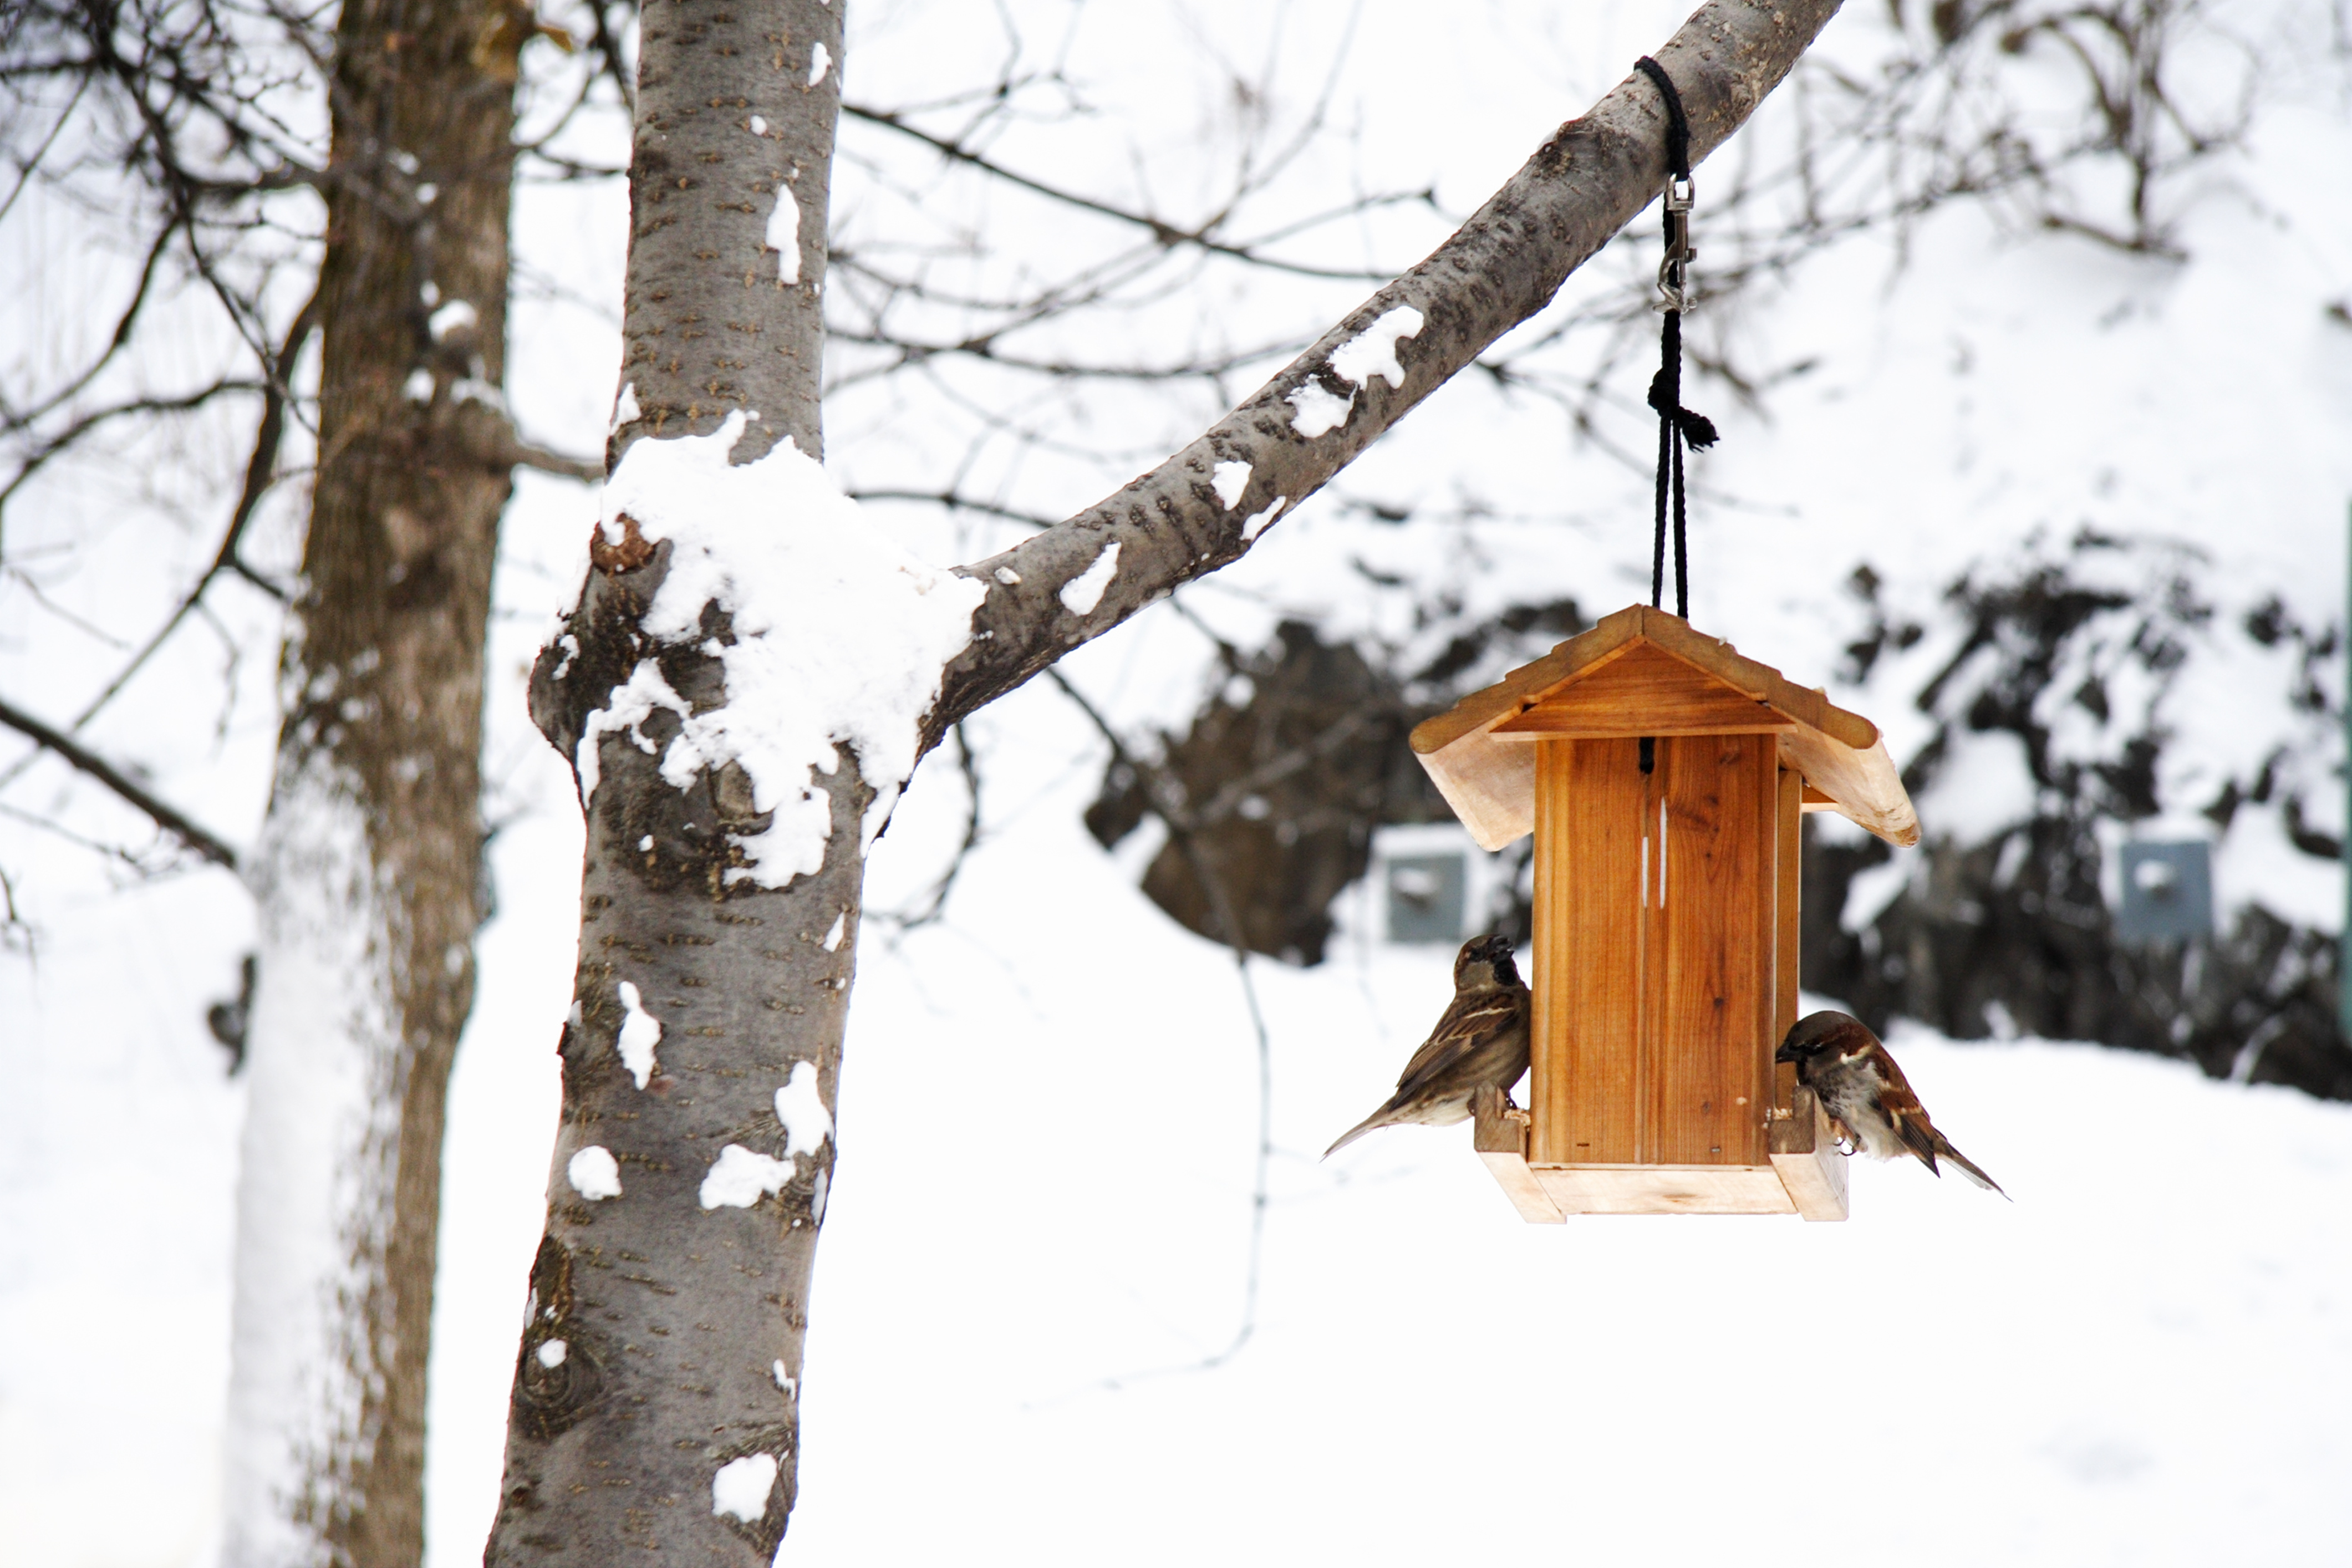 Two birds perched on a wooden bird house hanging from a snowy tree.